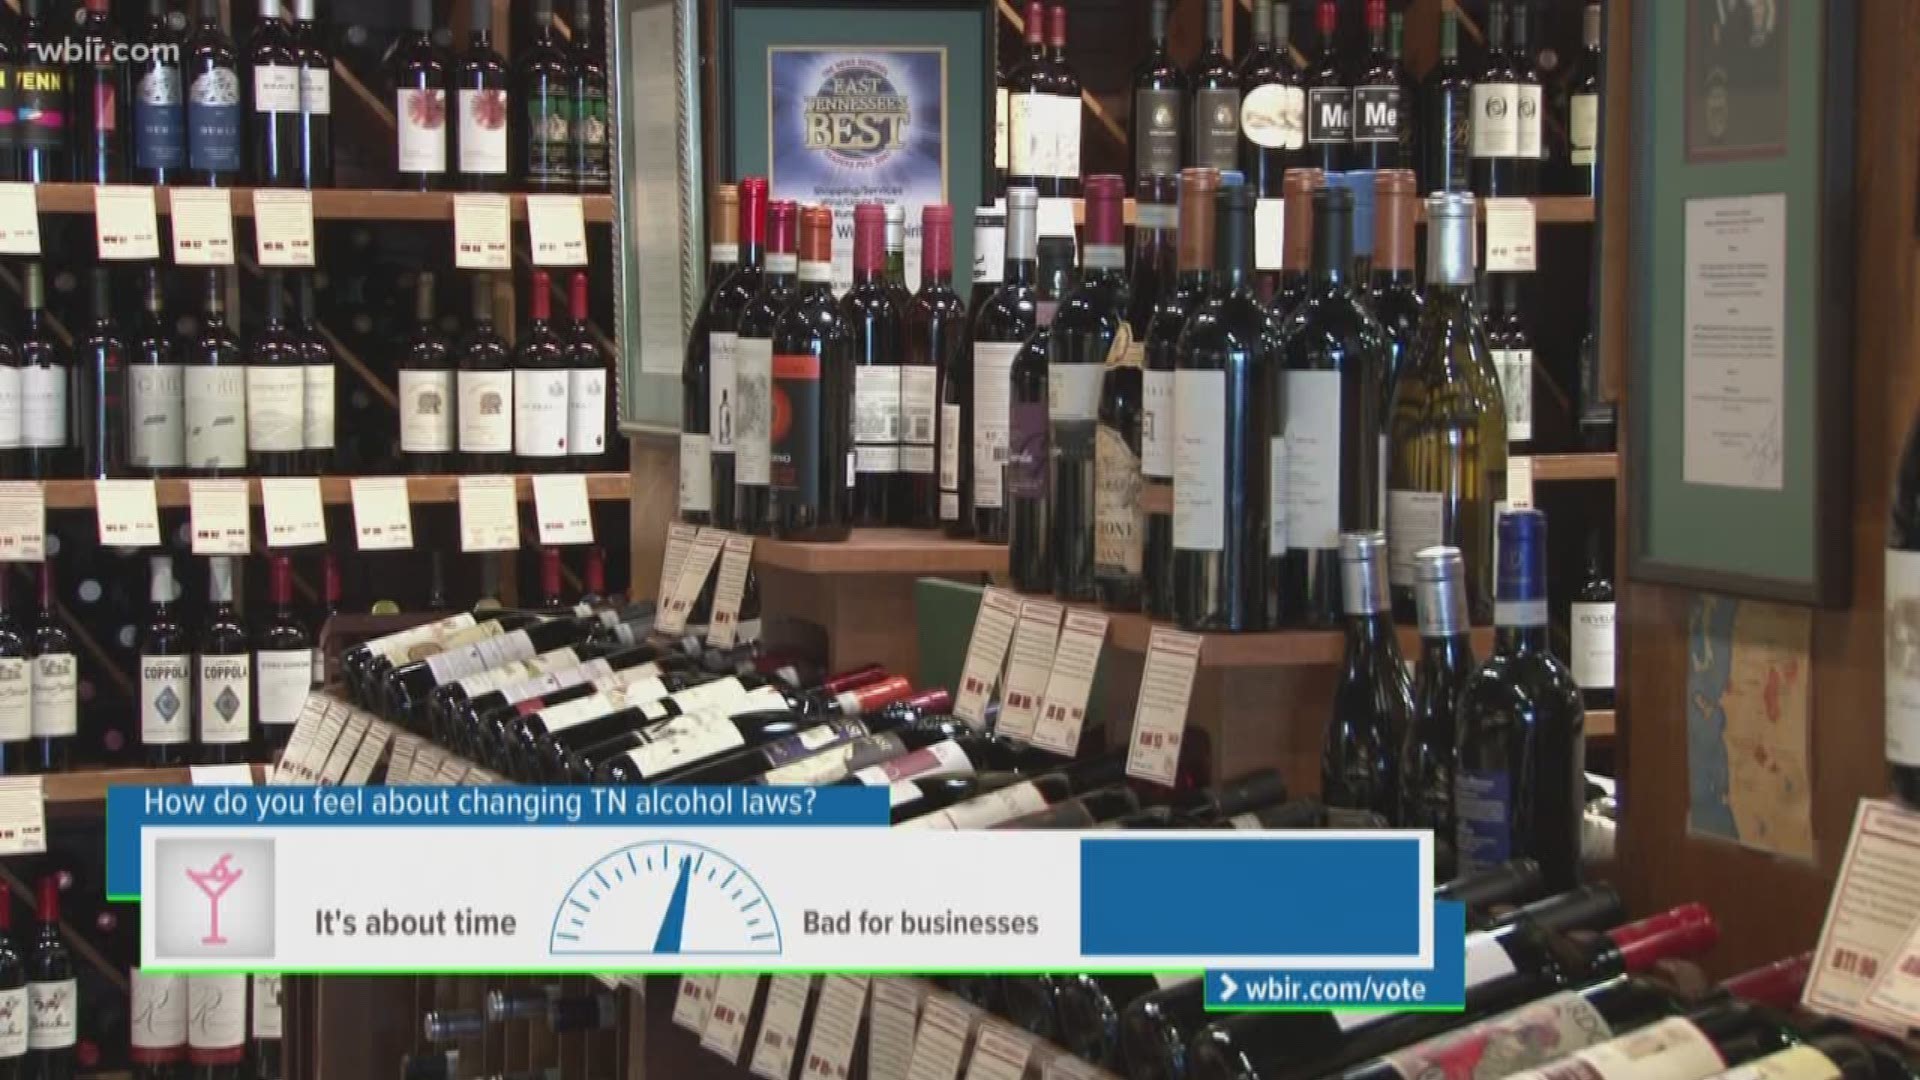 April 10, 2018: East Tennessee business owners are sharing mixed opinions on a bill that would allow Sunday wine sales and liquor store operations.